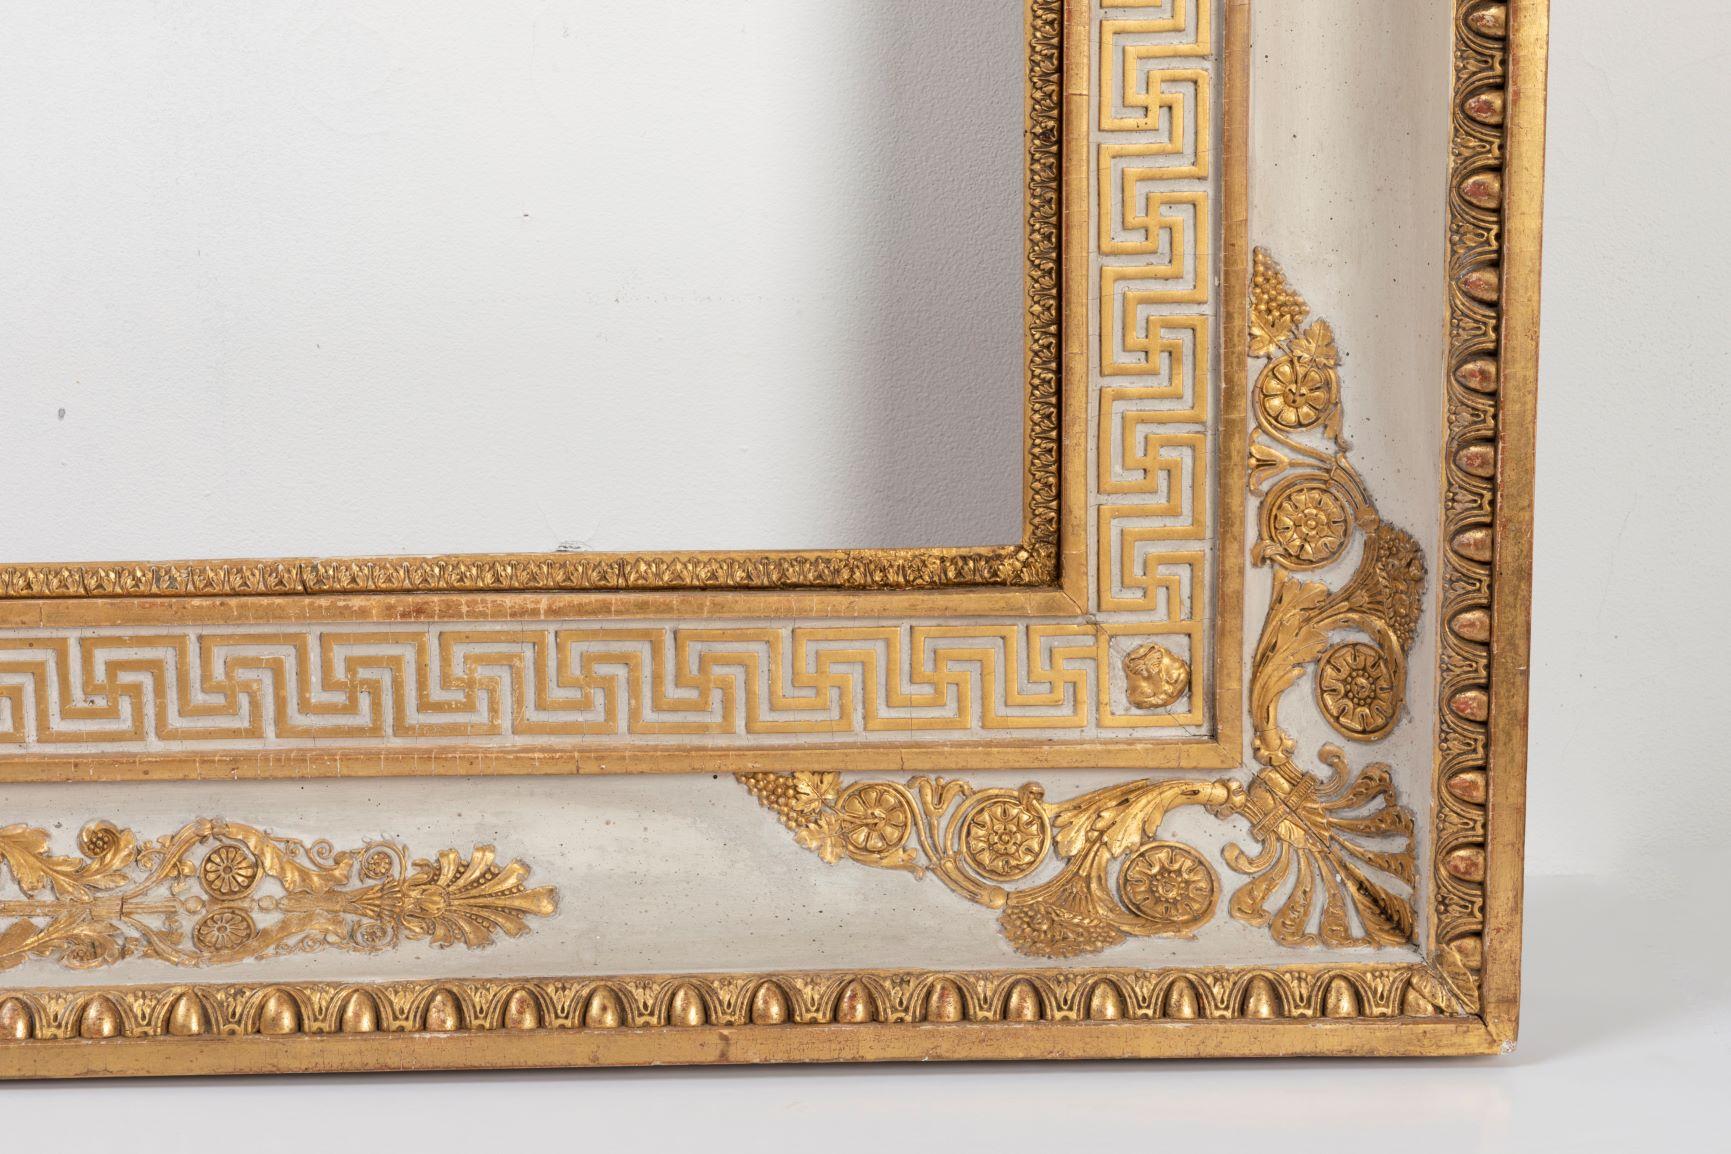 Splendid French Empire Carved Giltwood Frame or Mirror France Early 19th Century For Sale 1